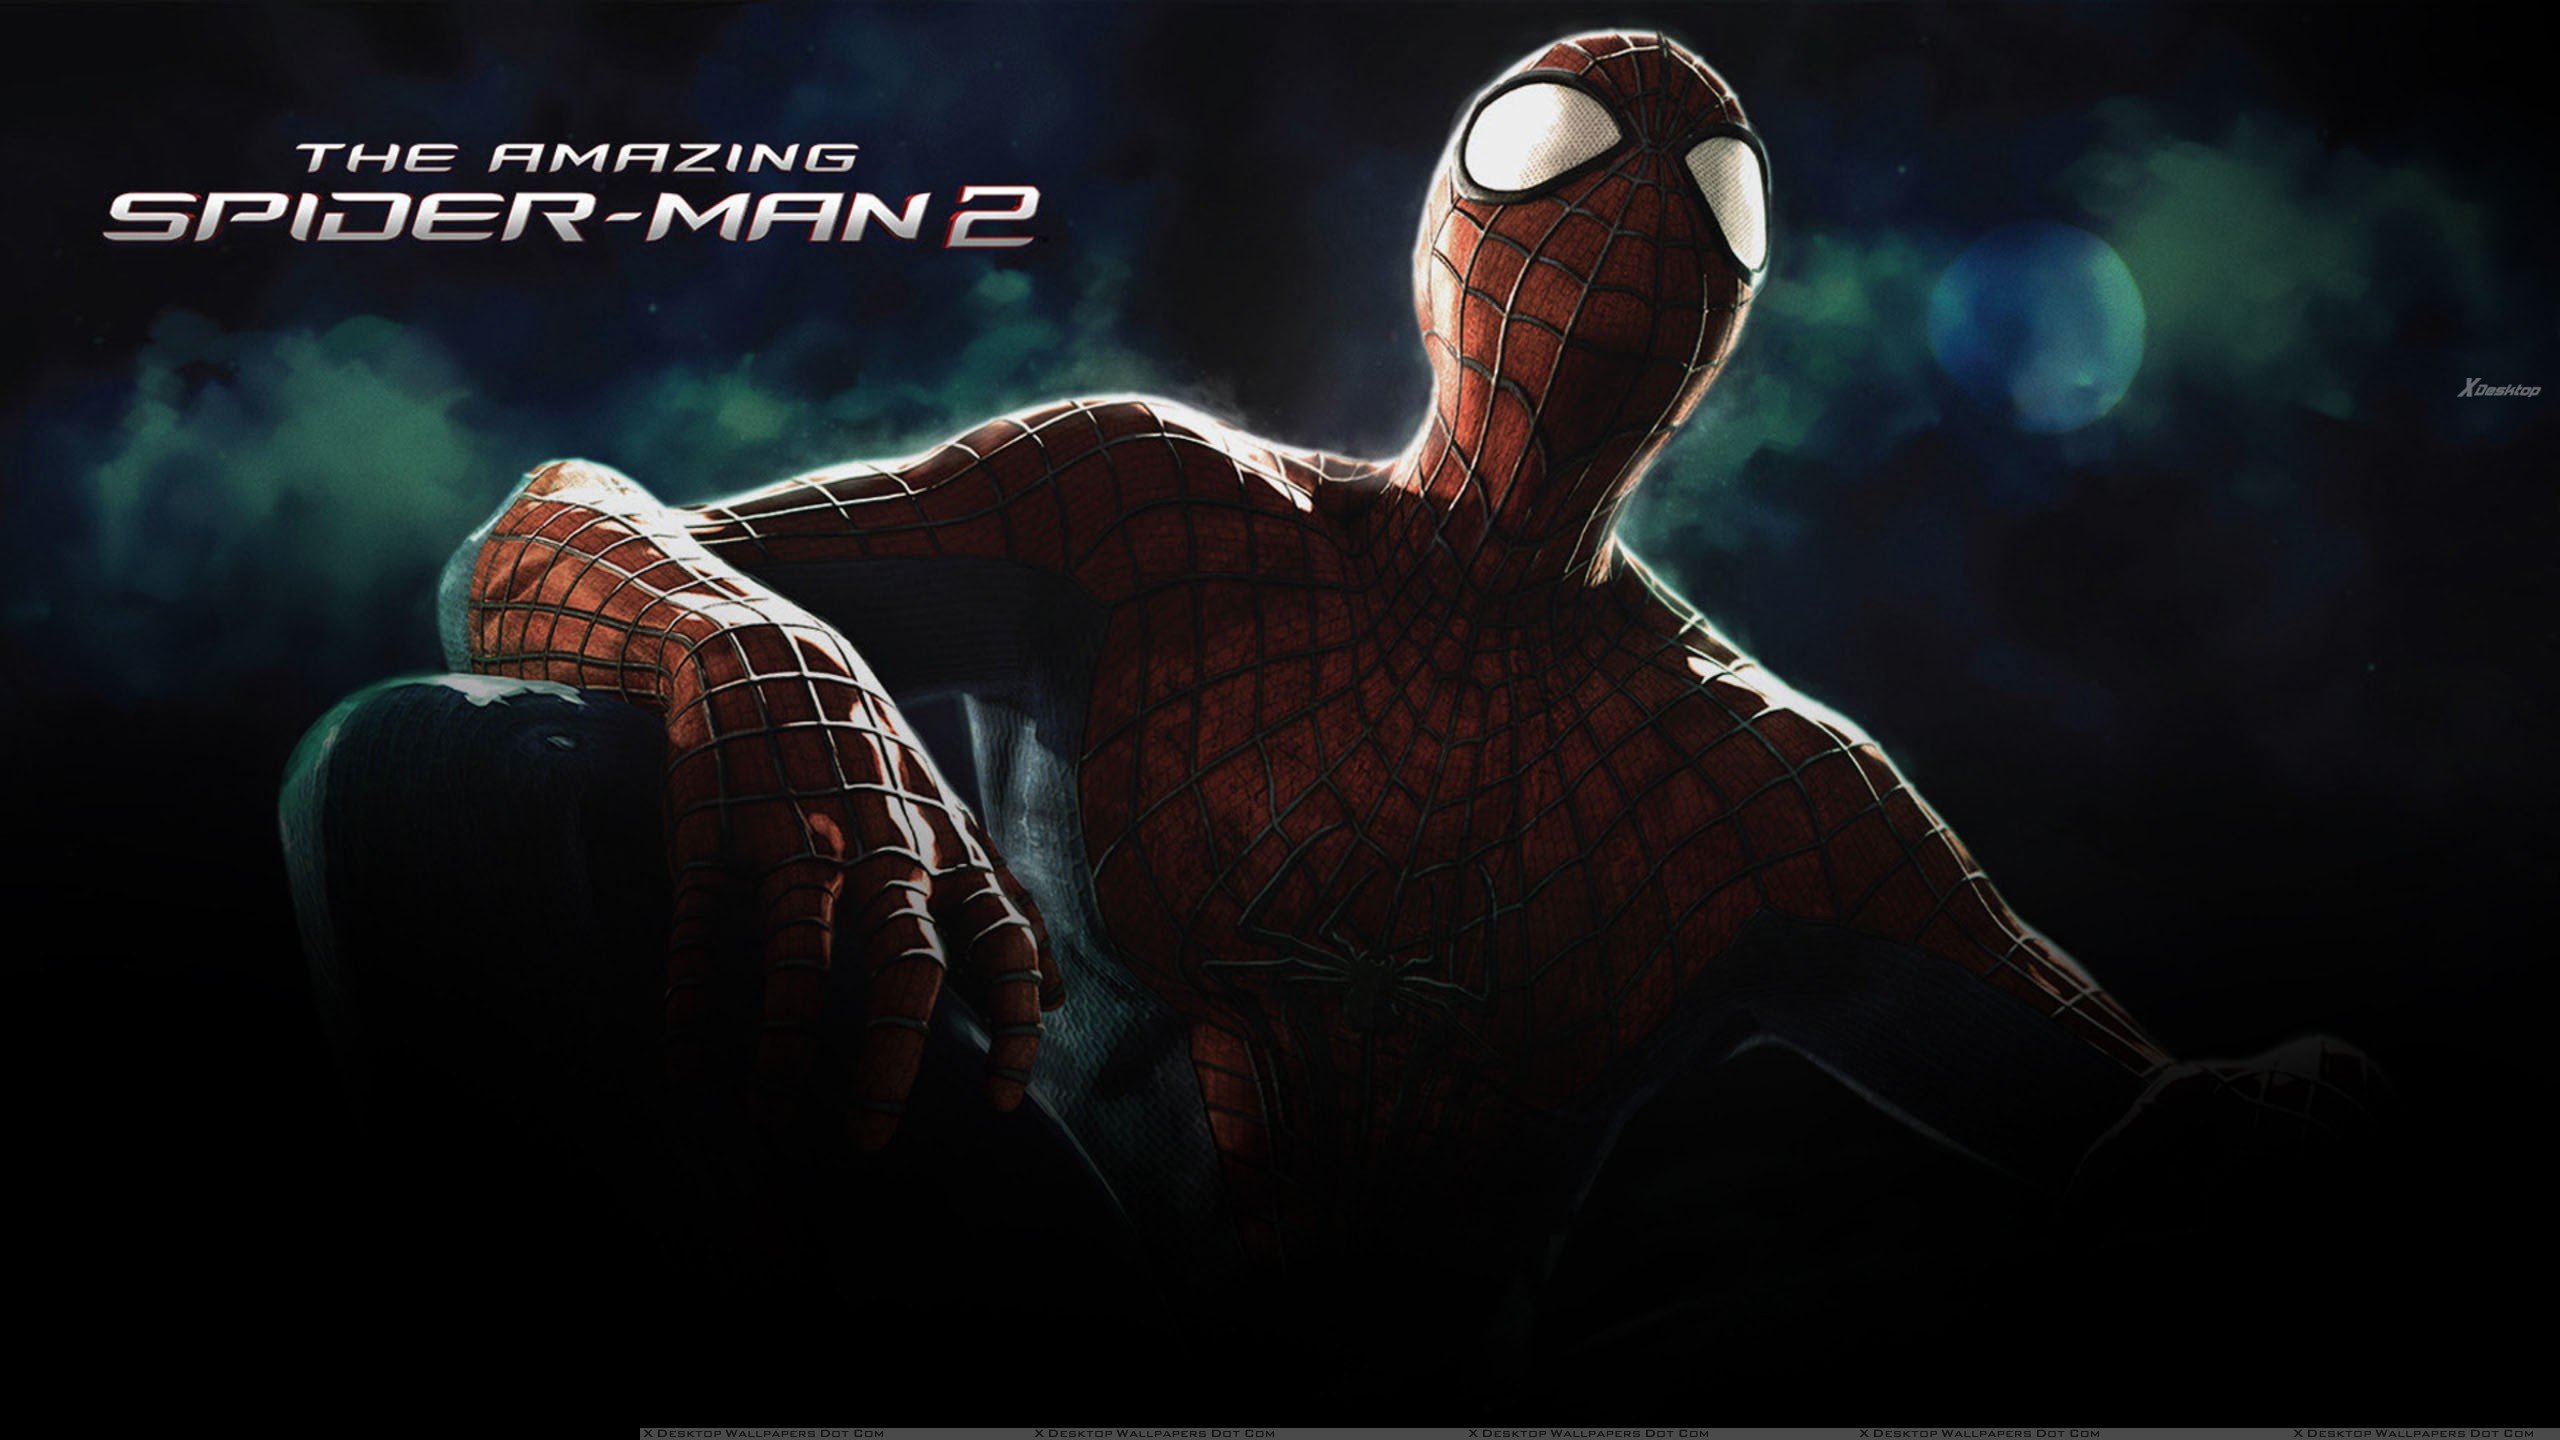 The Amazing Spider Man 2 Wallpaper, Photo & Image In HD